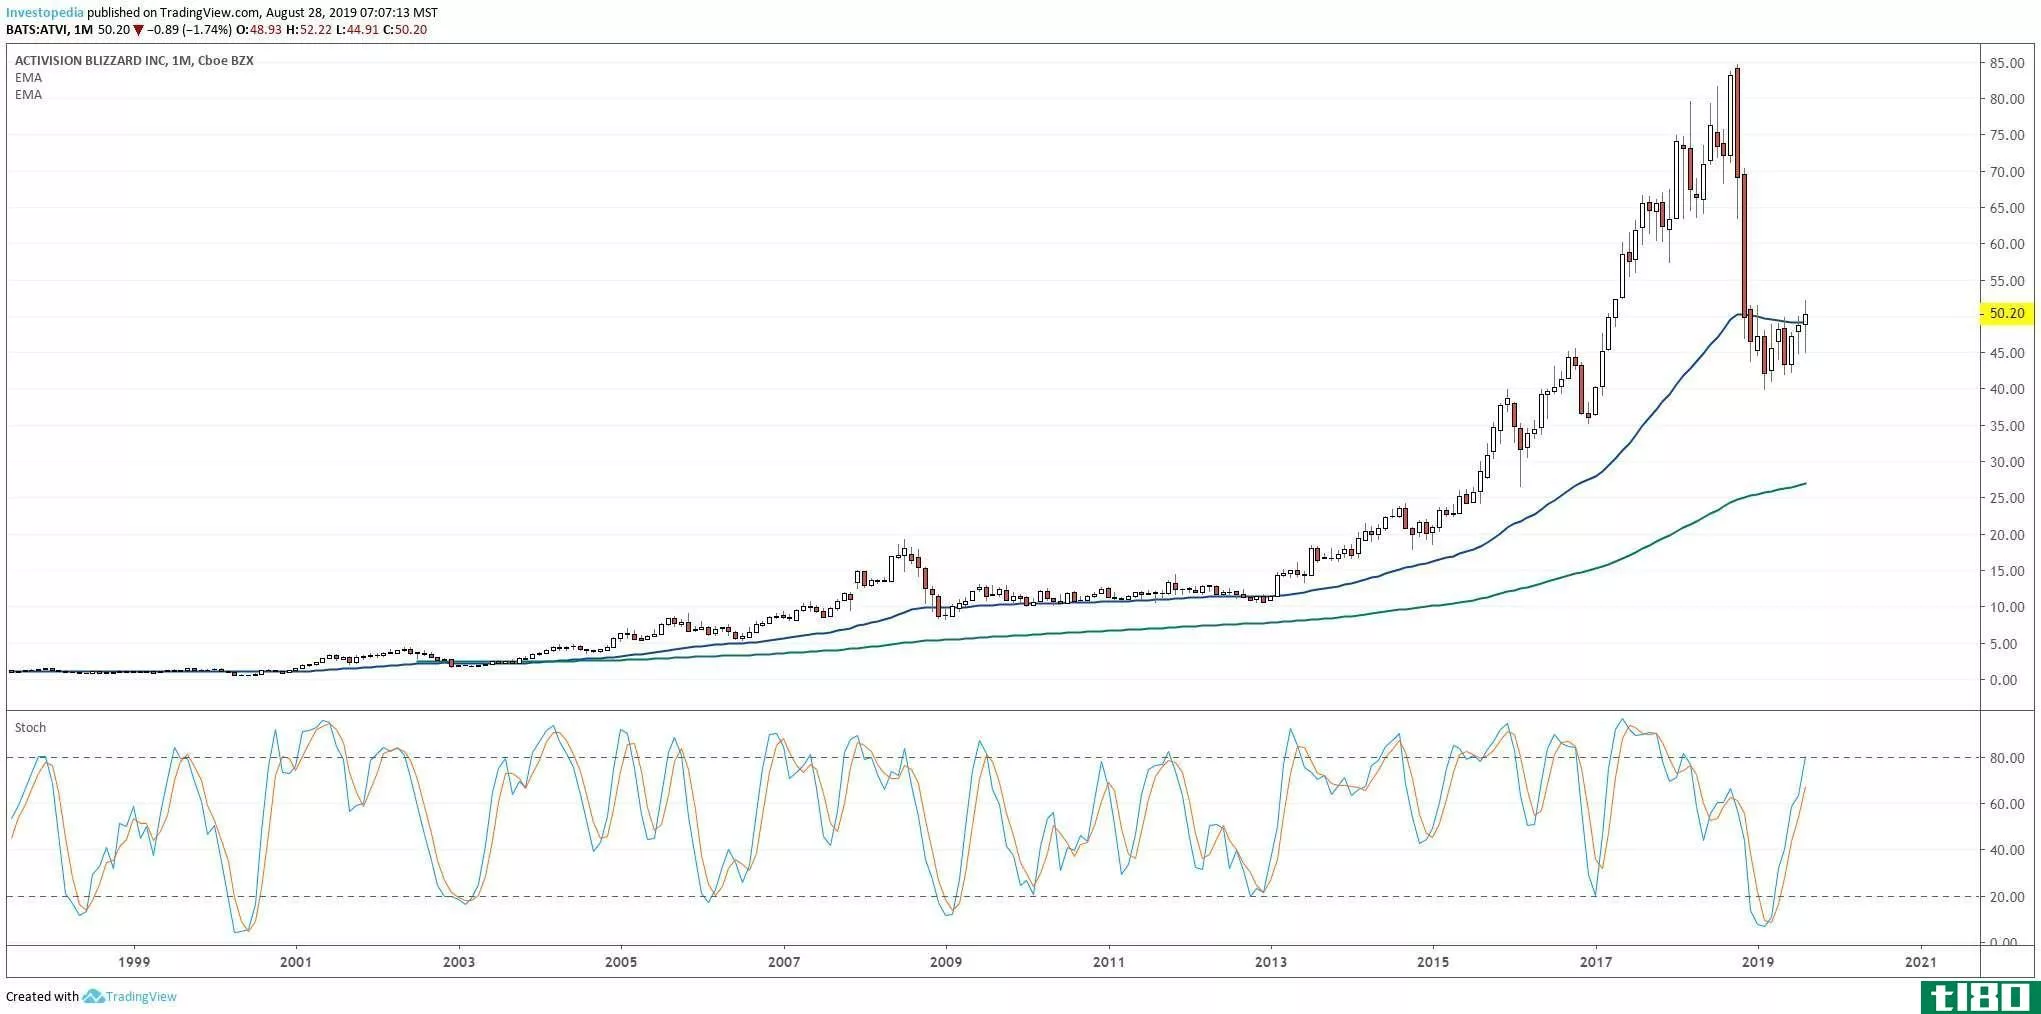 Long-term chart showing the share price performance of Activision Blizzard, Inc. (ATVI)